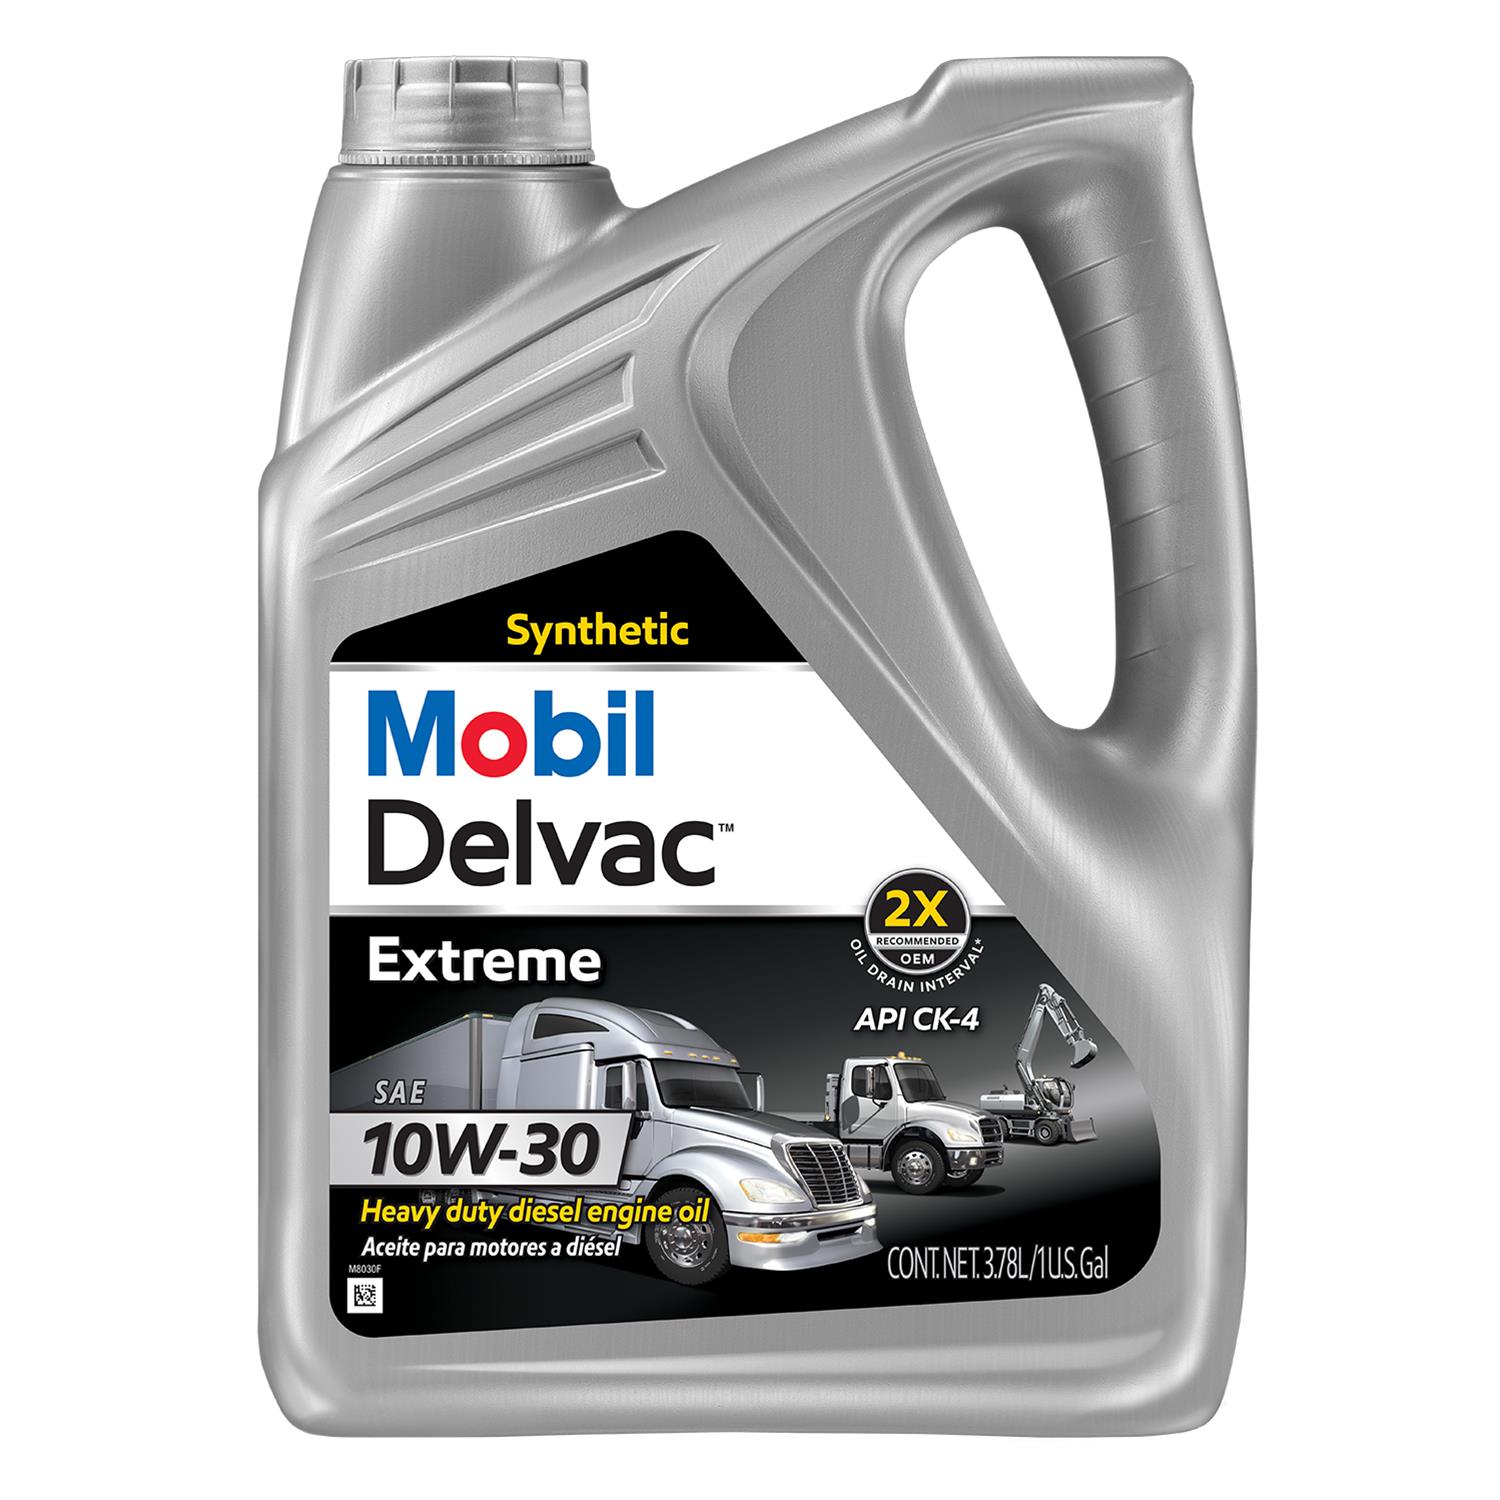 122454 Delvac Extreme Synthetic Motor Oil, 10W-30, 1-Gallon